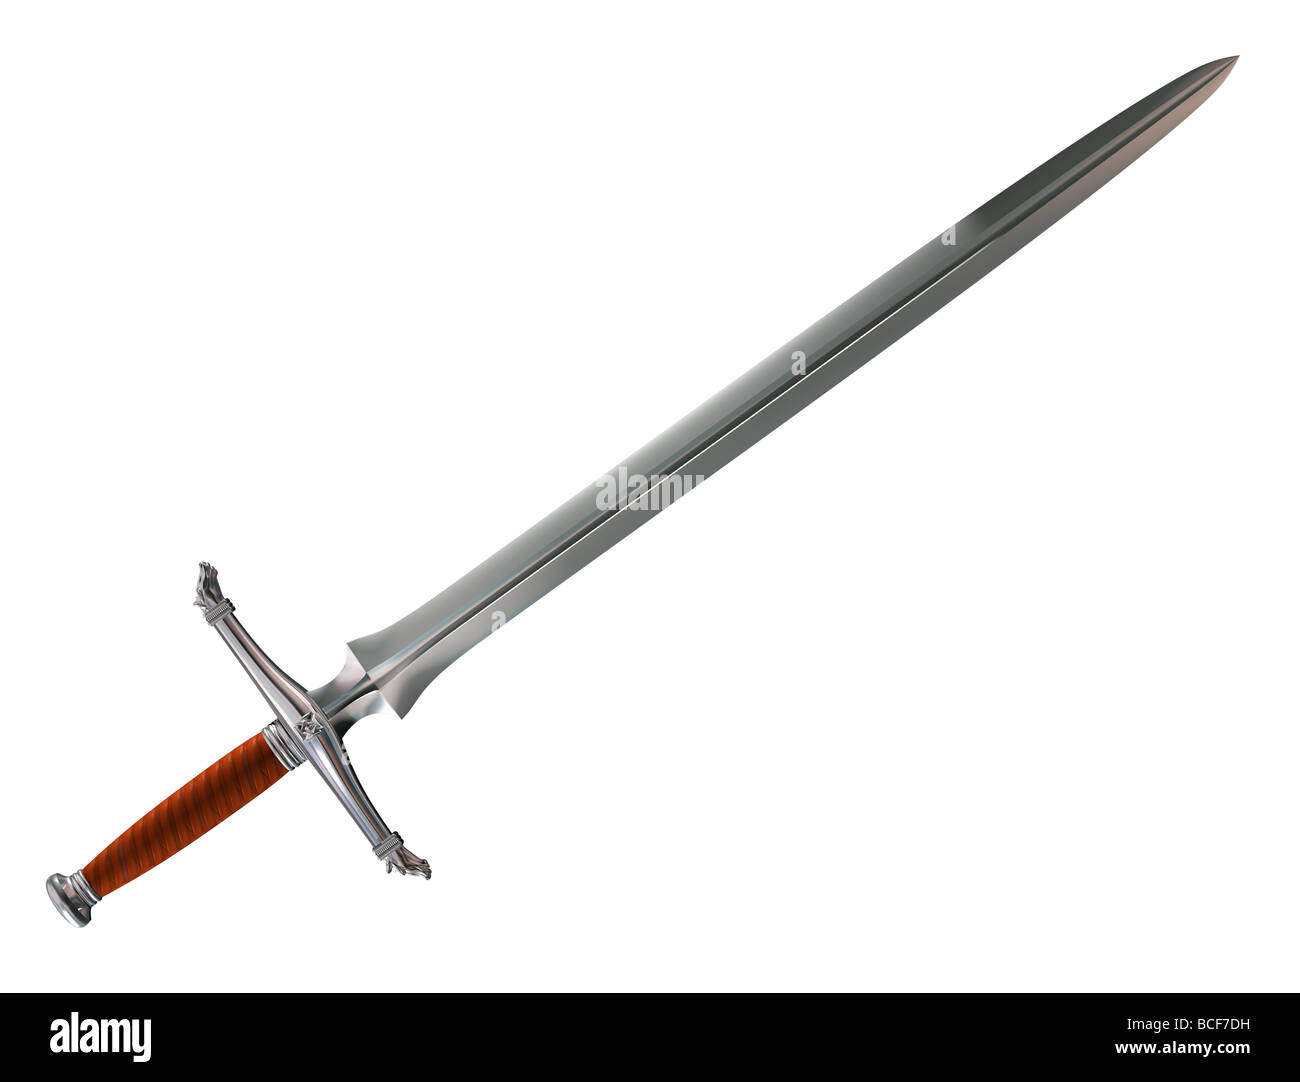 Isolated illustration of a foreboding Norman battle sword Stock Photo